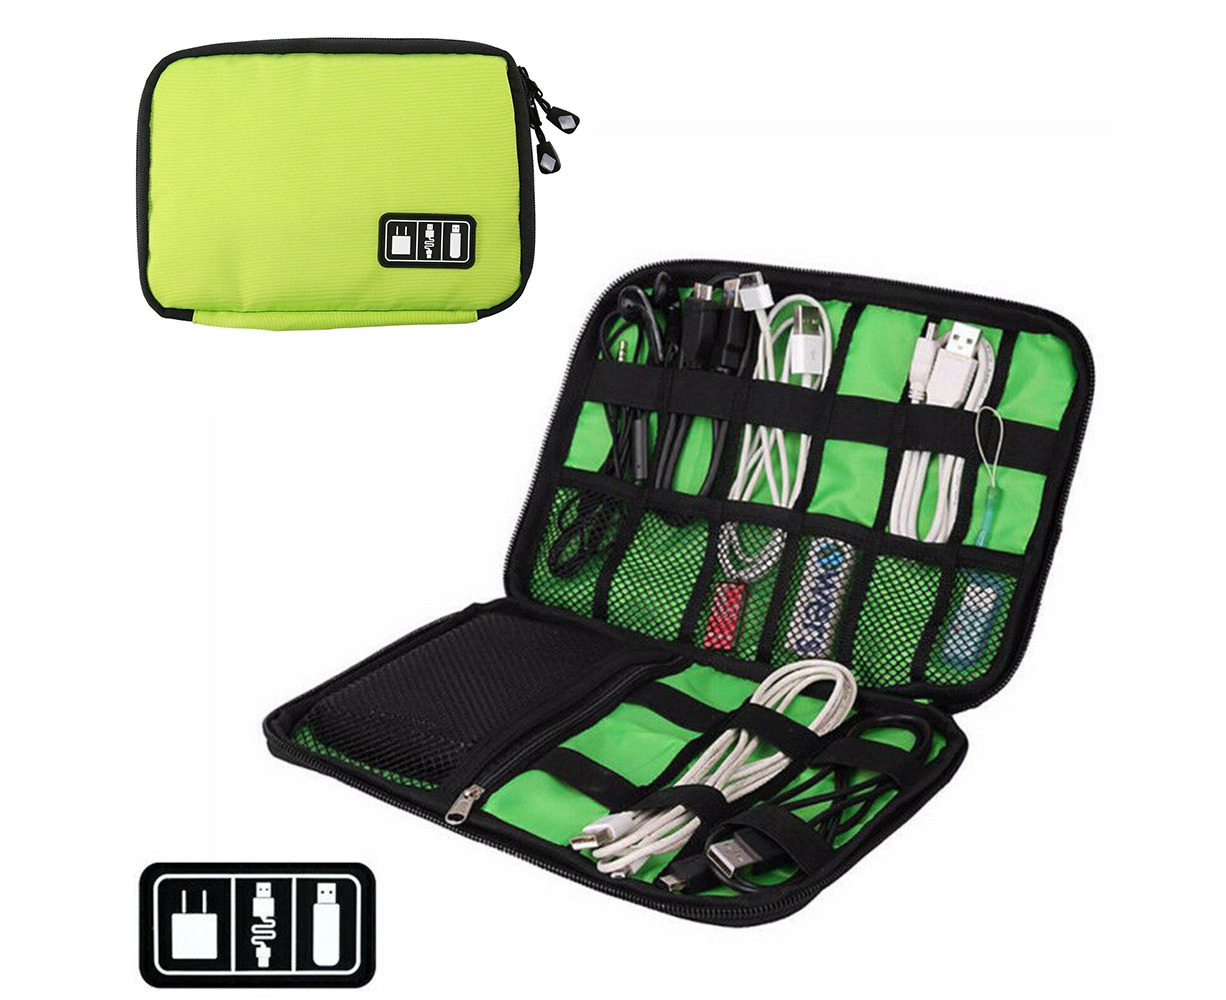 Charger Electronic Organizer Travel Universal Cable Organizer Electronics Accessories Cases for Cable USB Dark Blue Phone SD Card 